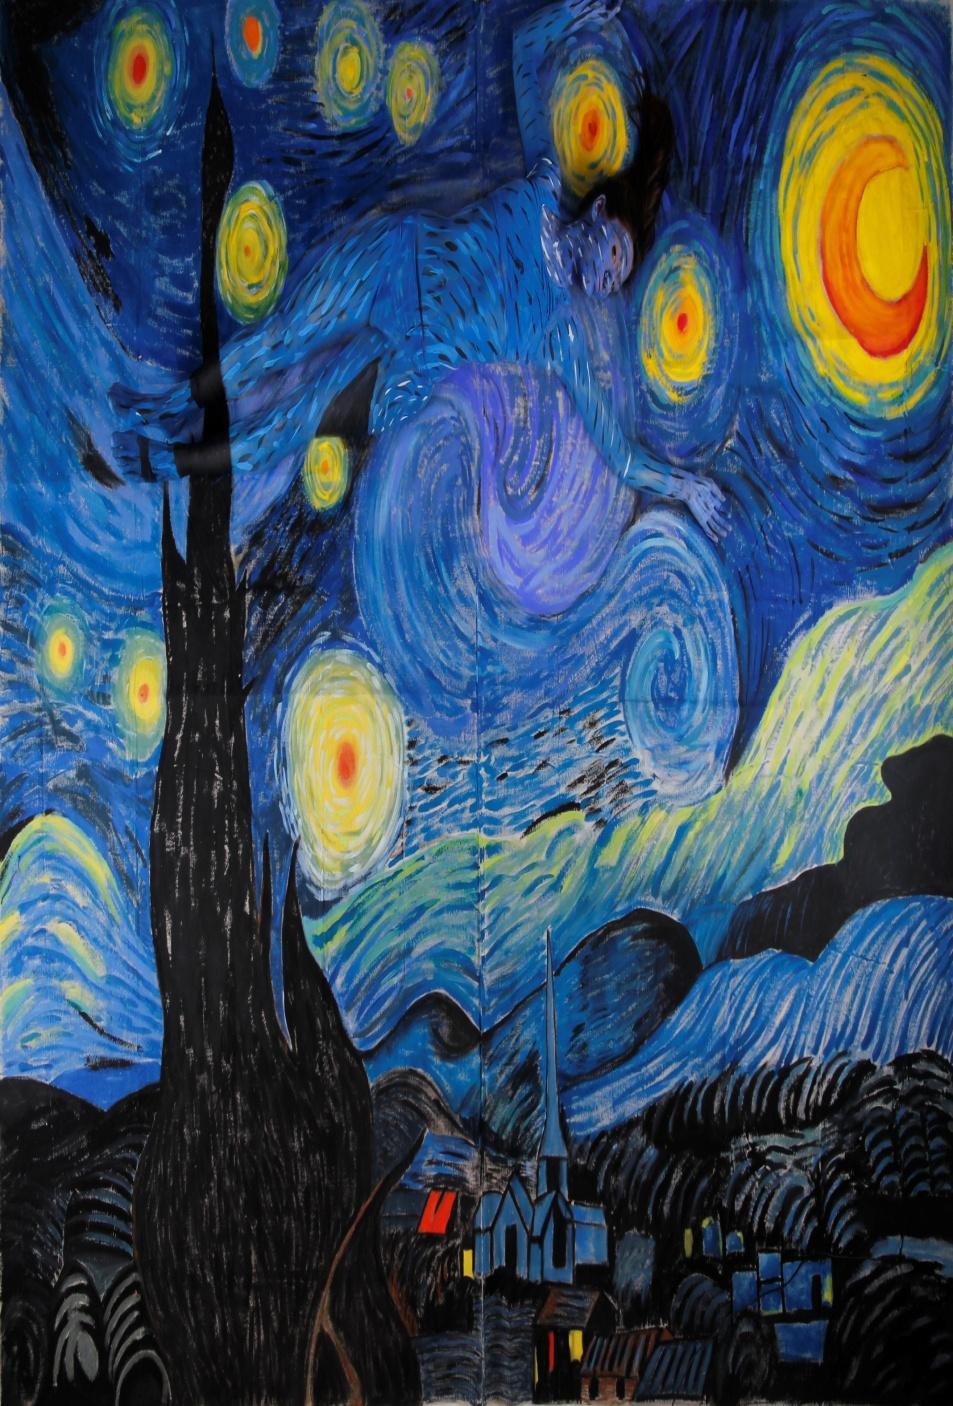 STARRY NIGHT BY VINCENT VAN GOGH (1889) Sunflowers, starry nights, a severed ear and suicide create a compelling story to anyone looking